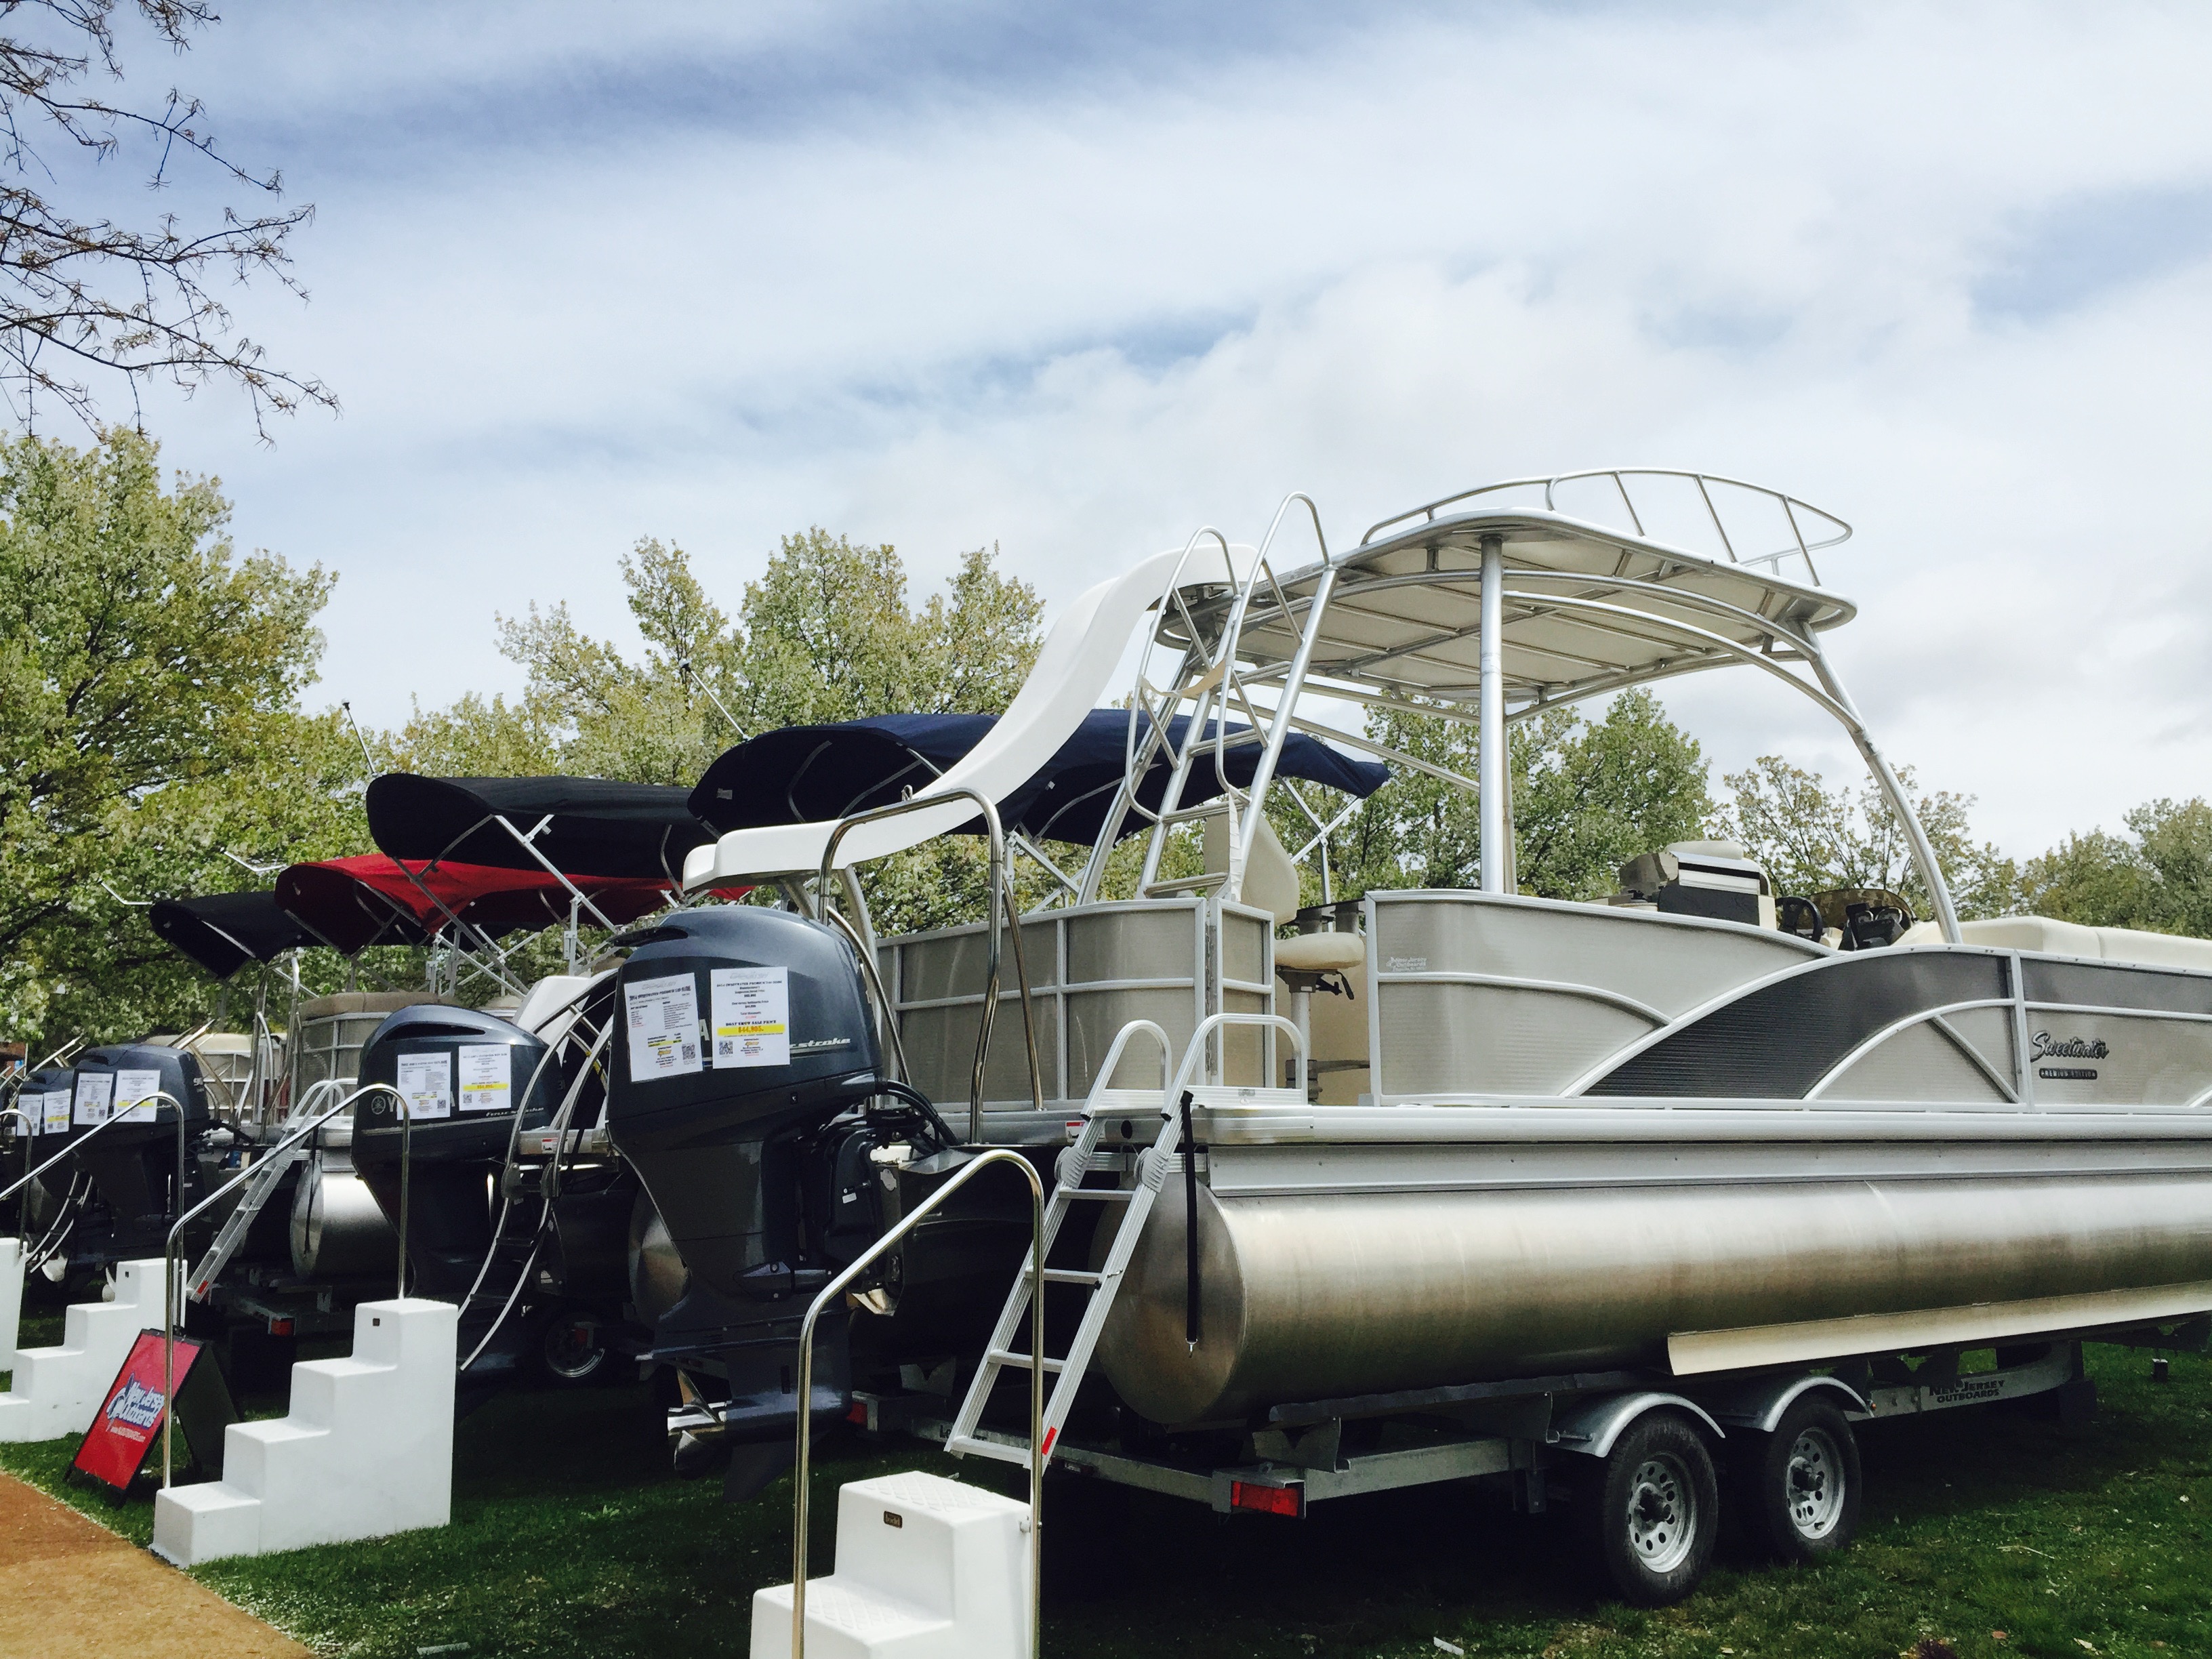 Another view of the pontoons at the 2015 huddy park in water spring show